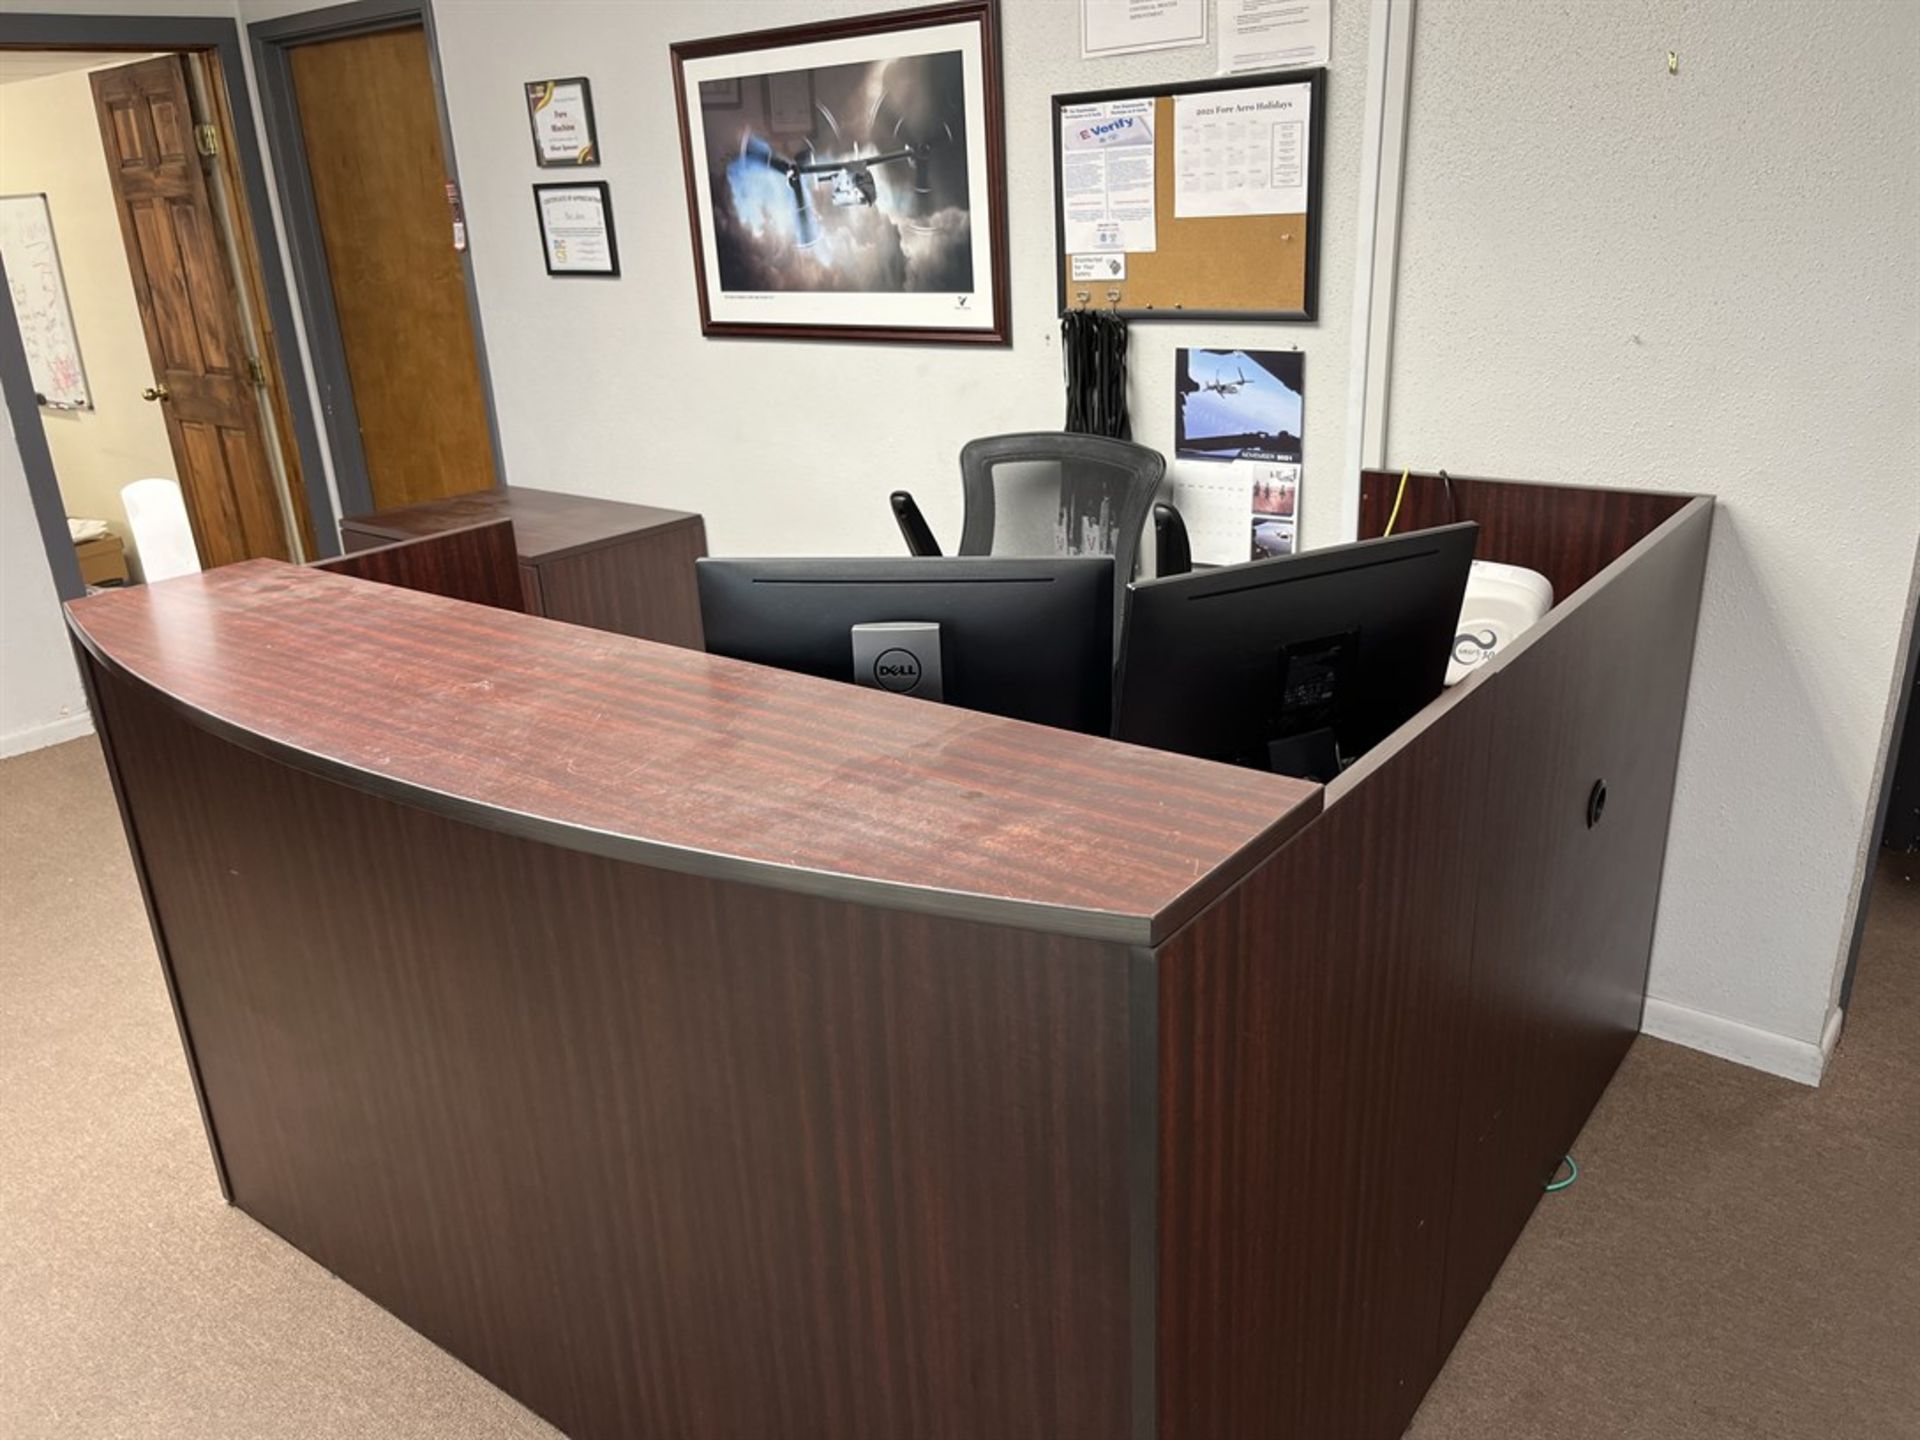 Lot consisting of Reception Desk, Monitors, File Cabinets, and Chair, (PC NOT INCLUDED) - Image 2 of 5